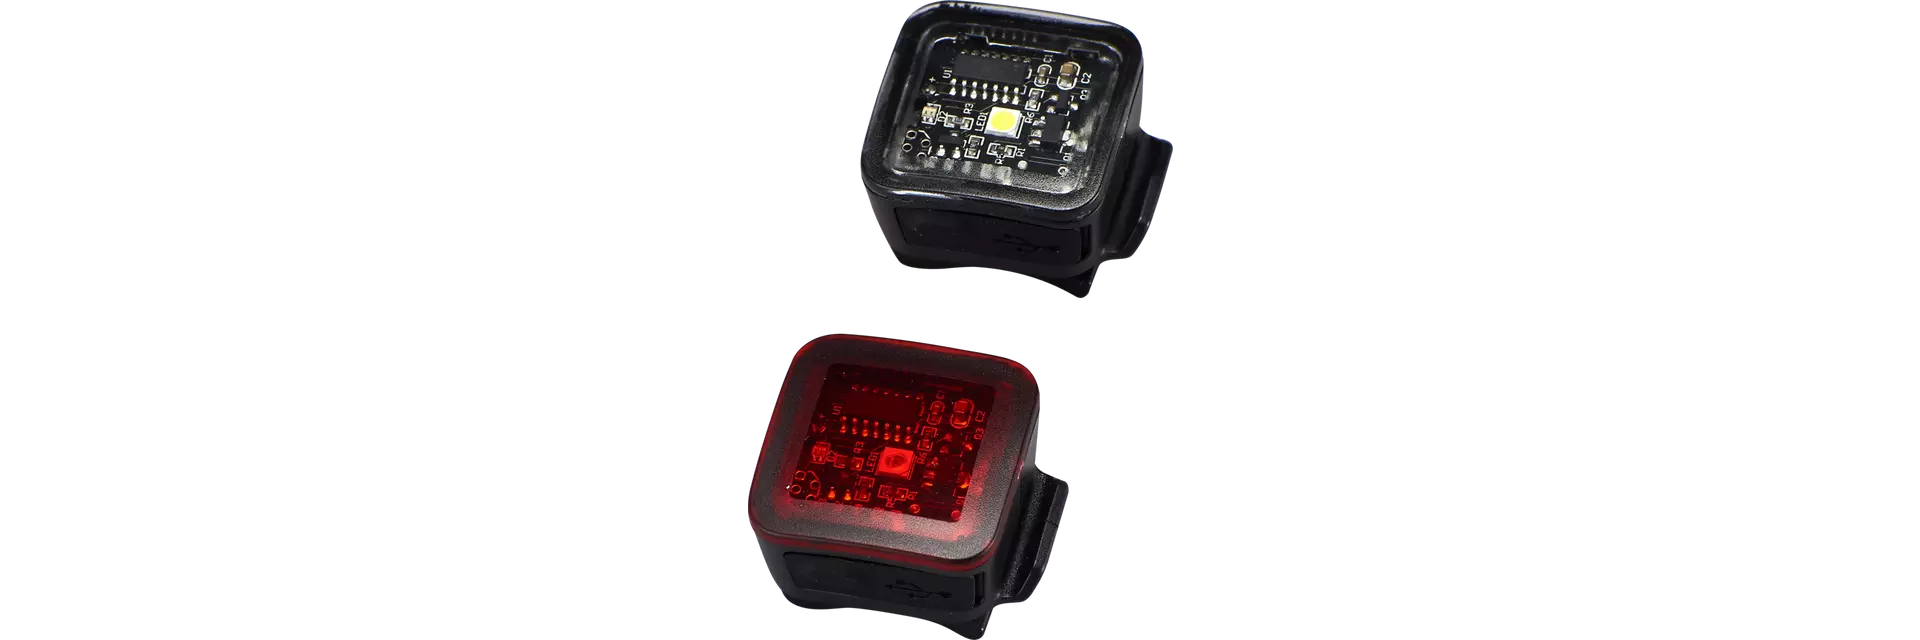 Specialized bike Headlight - Tail light combo pack.  